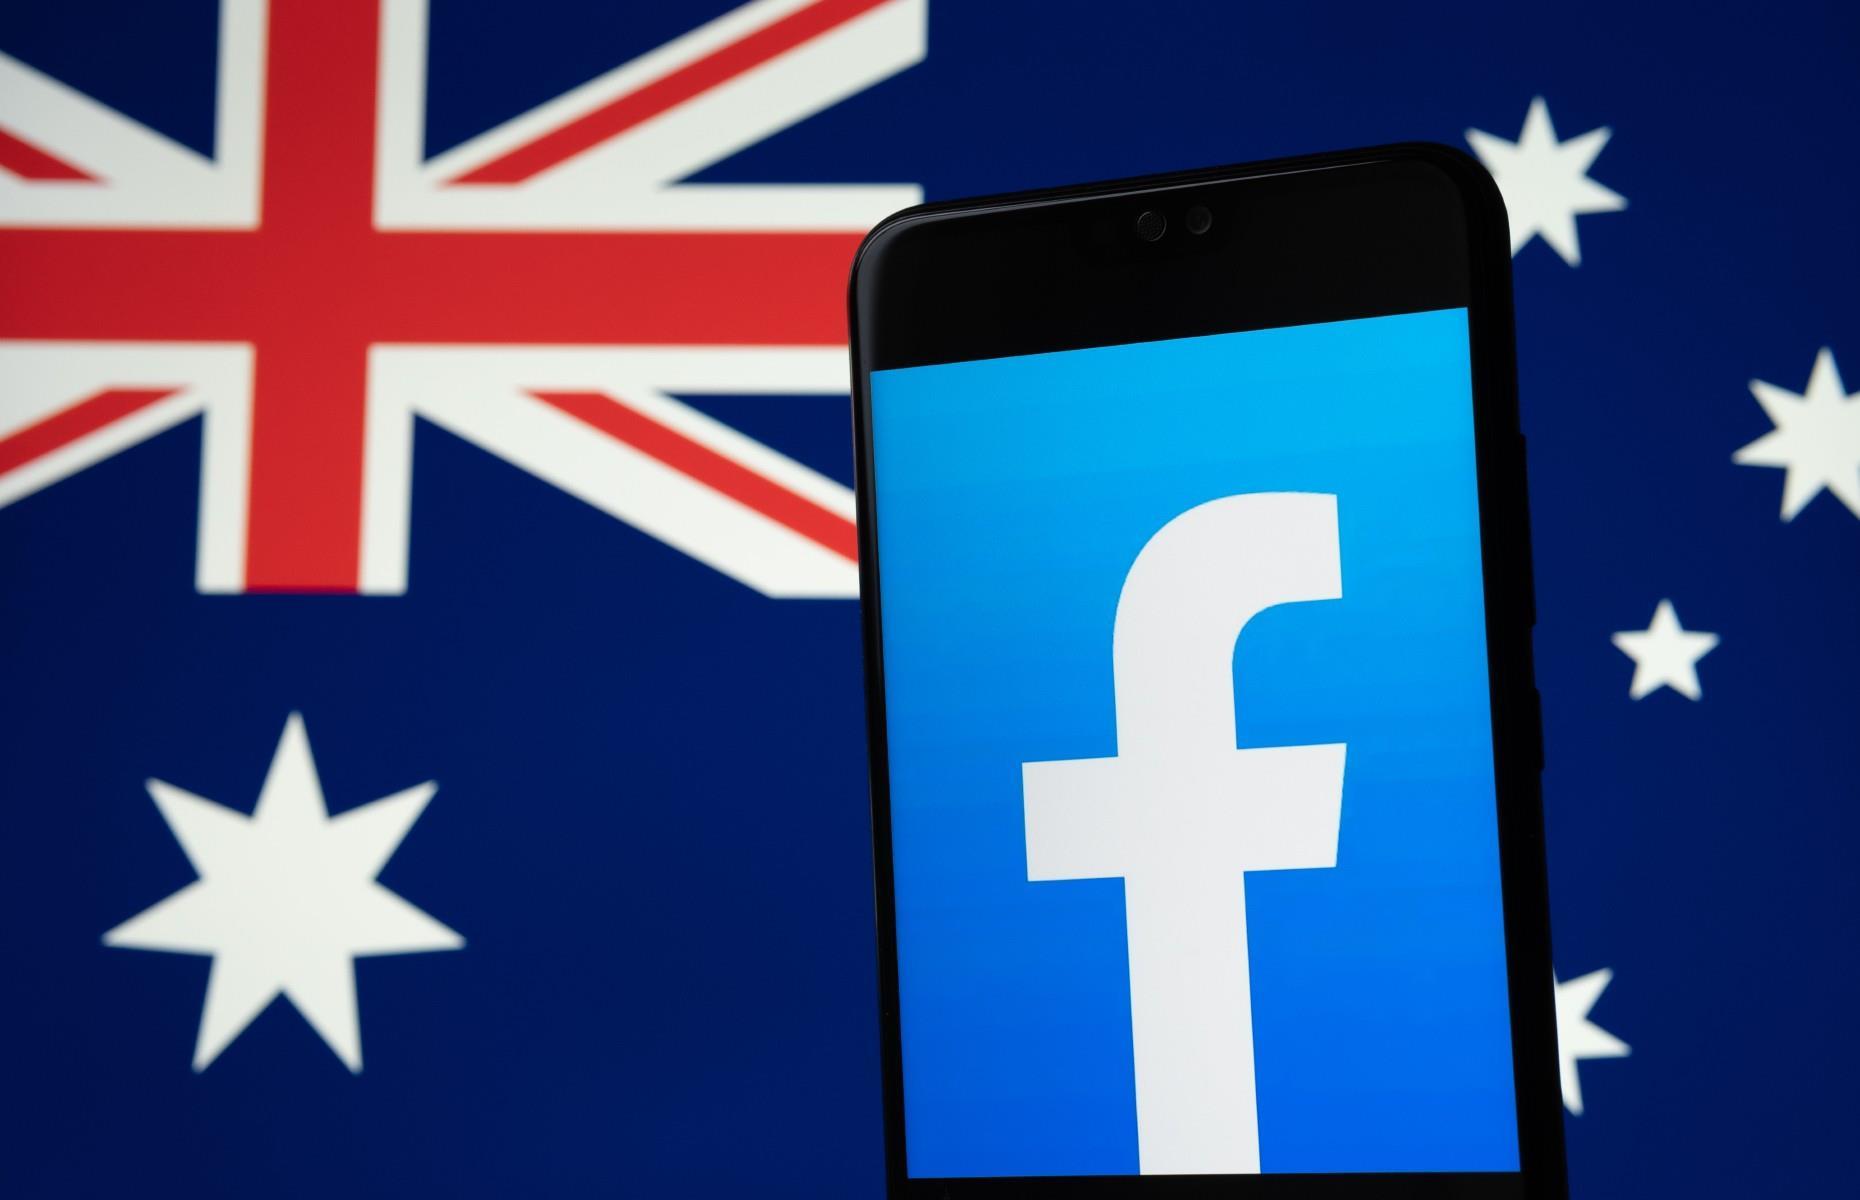 Facebook is going to start paying for news in Australia